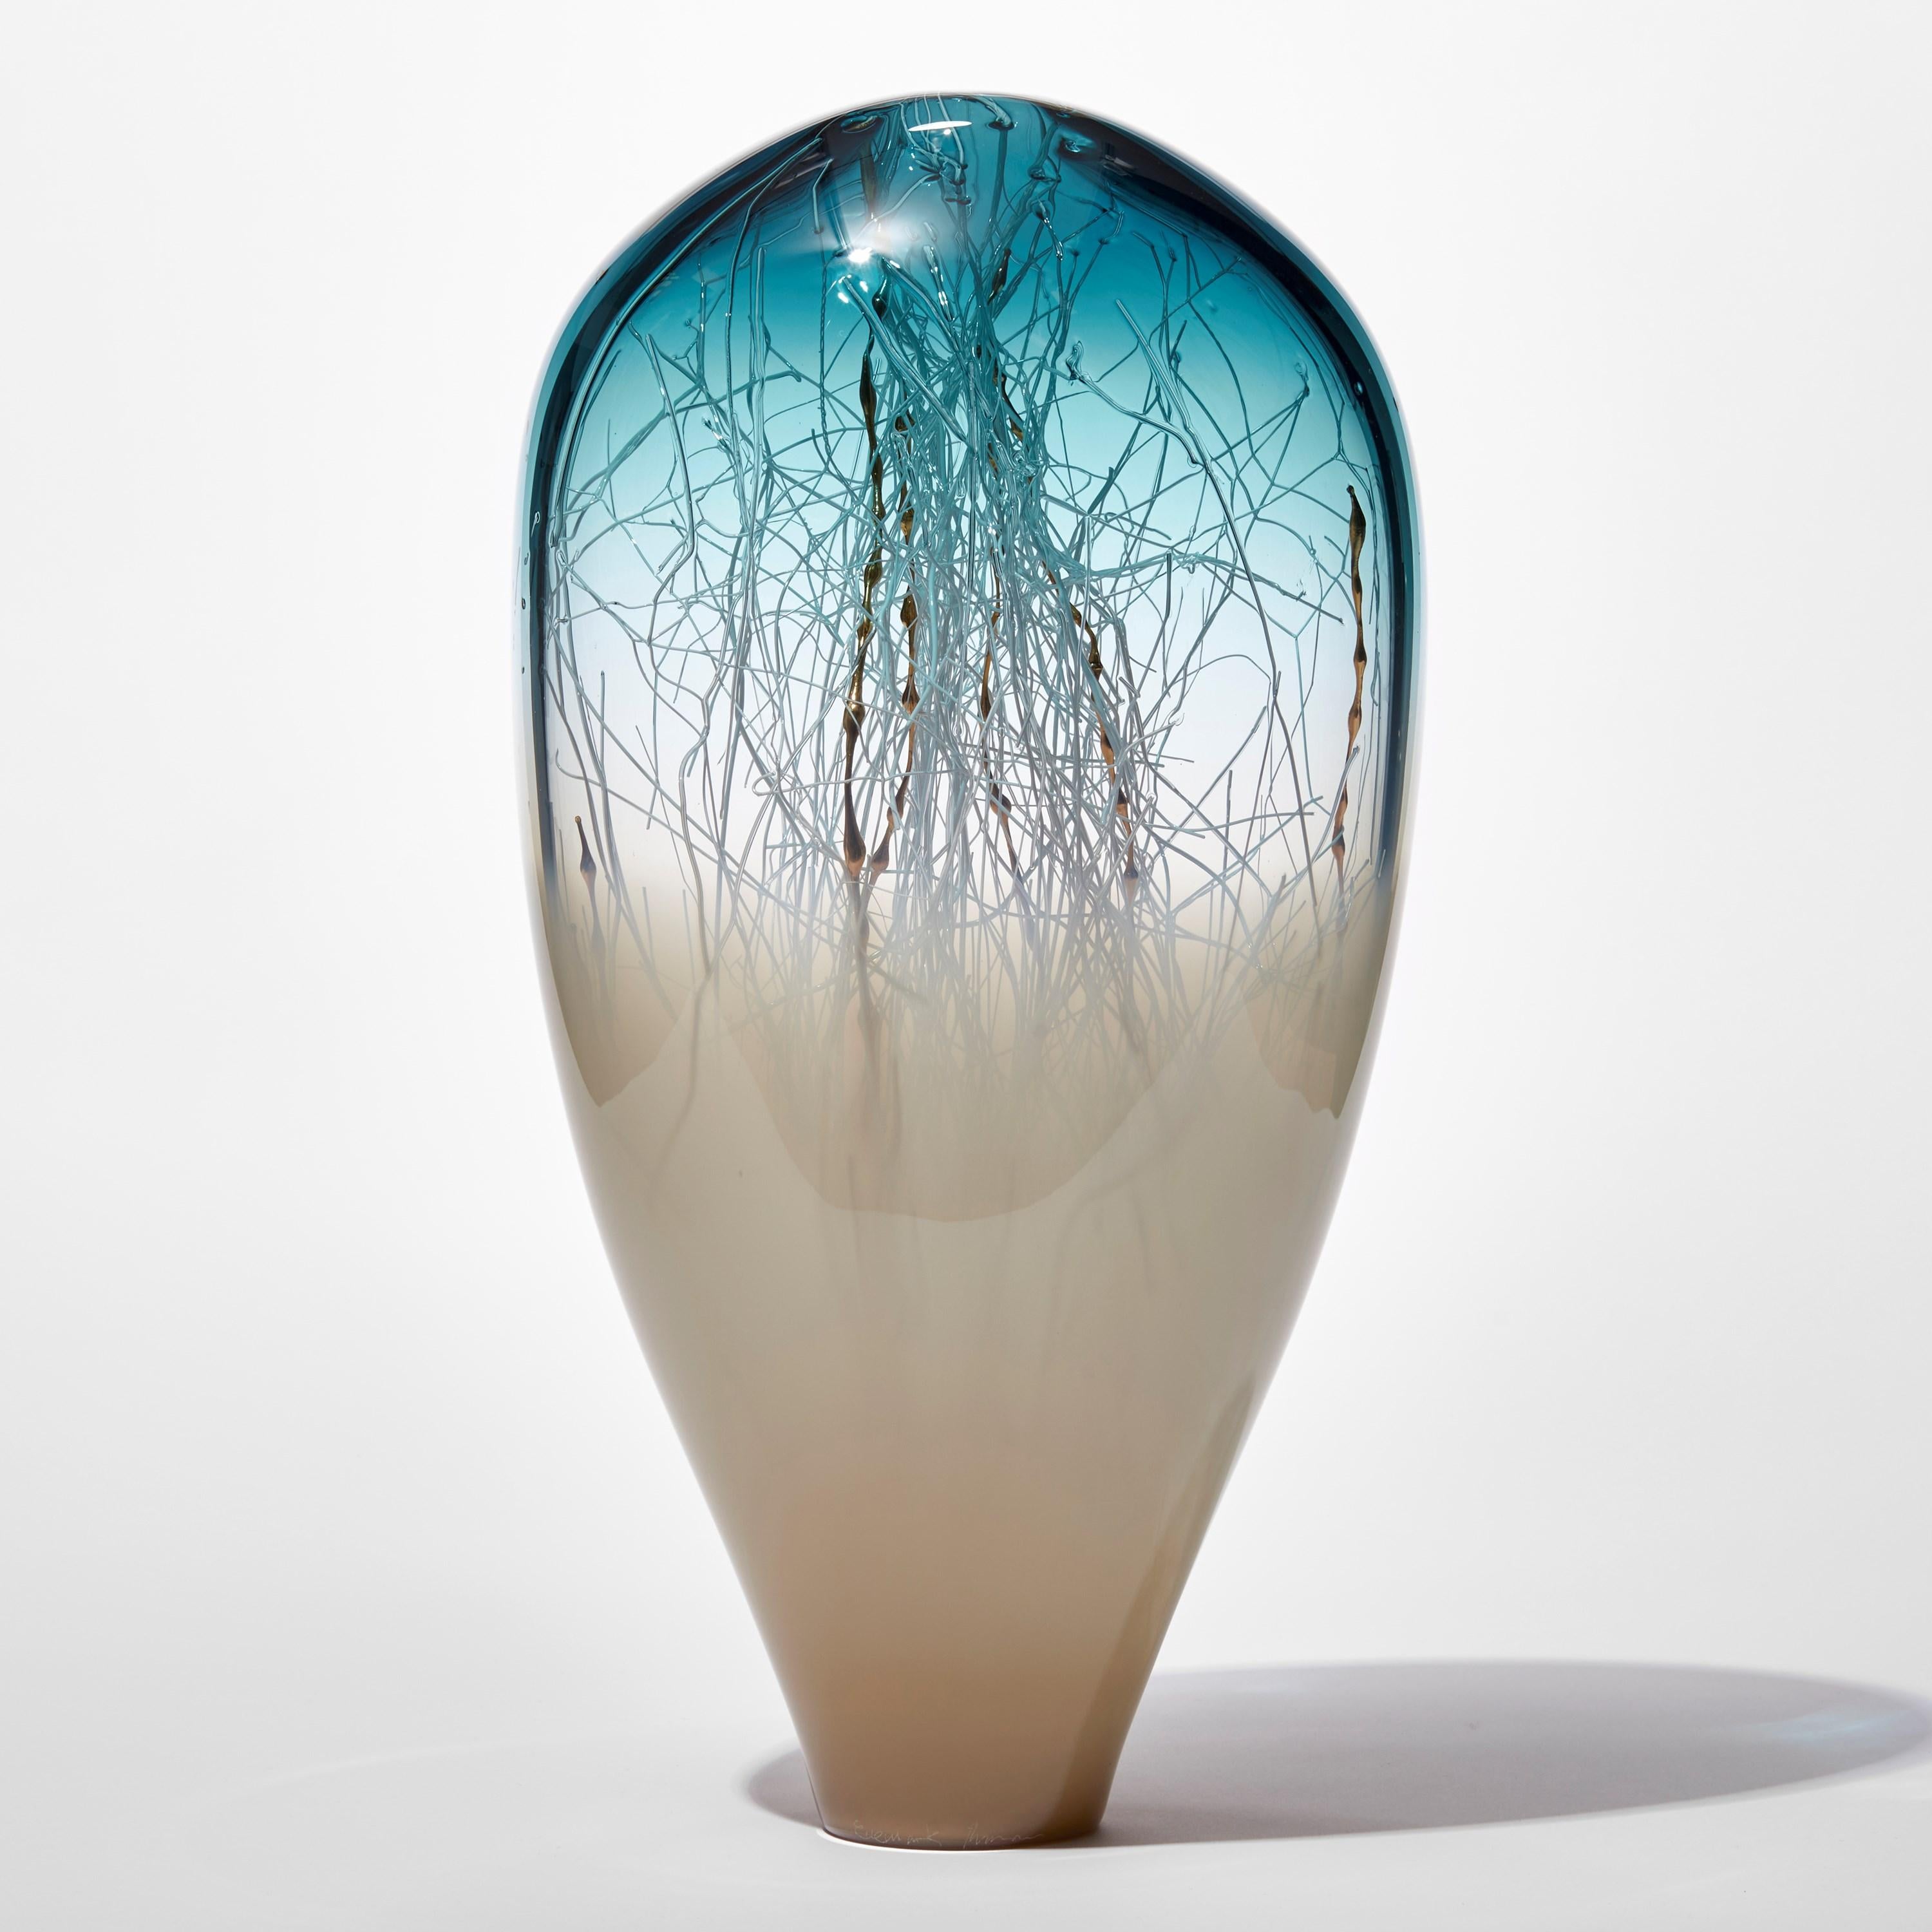 'Elixir in Weimaraner and Ocean Blue' is a unique handblown and sculpted glass artwork by the Danish and British artists, Hanne Enemark & Louis Thompson.

The outer glass form contains a multitude of fine white canes of glass, some of which have